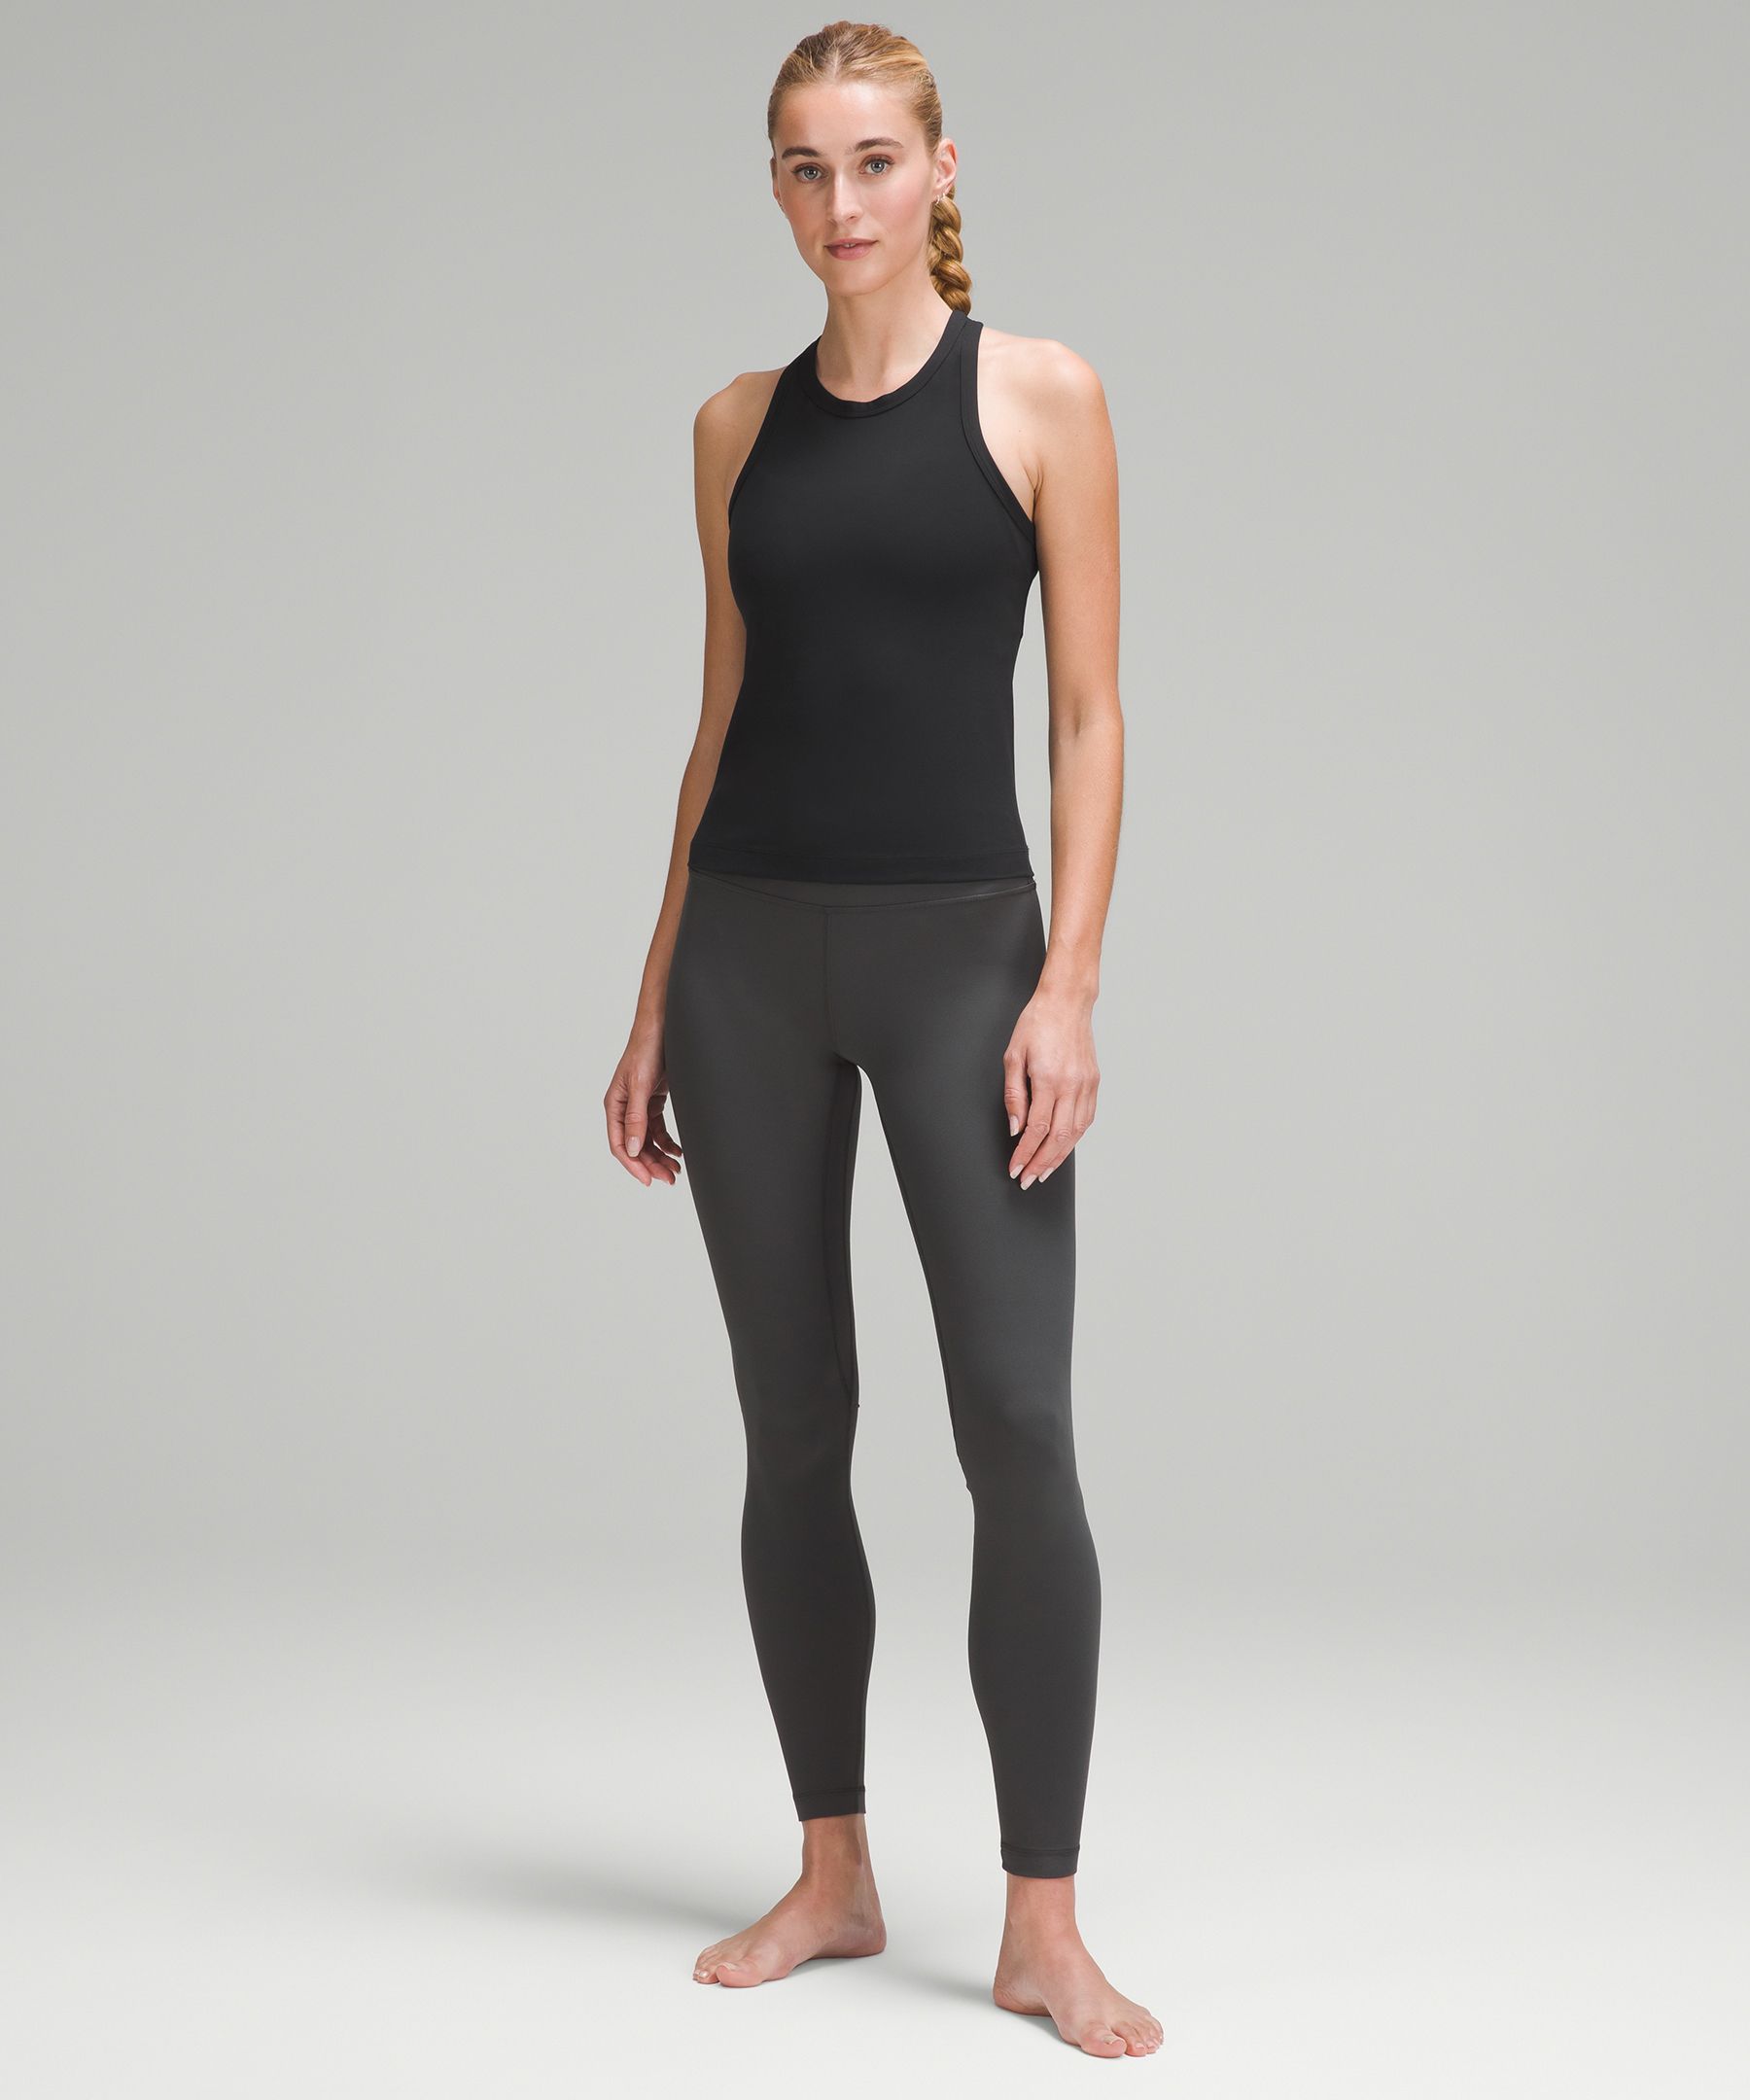 Lululemon Align Tank Multiple Size 0 - $50 (26% Off Retail) - From Cece